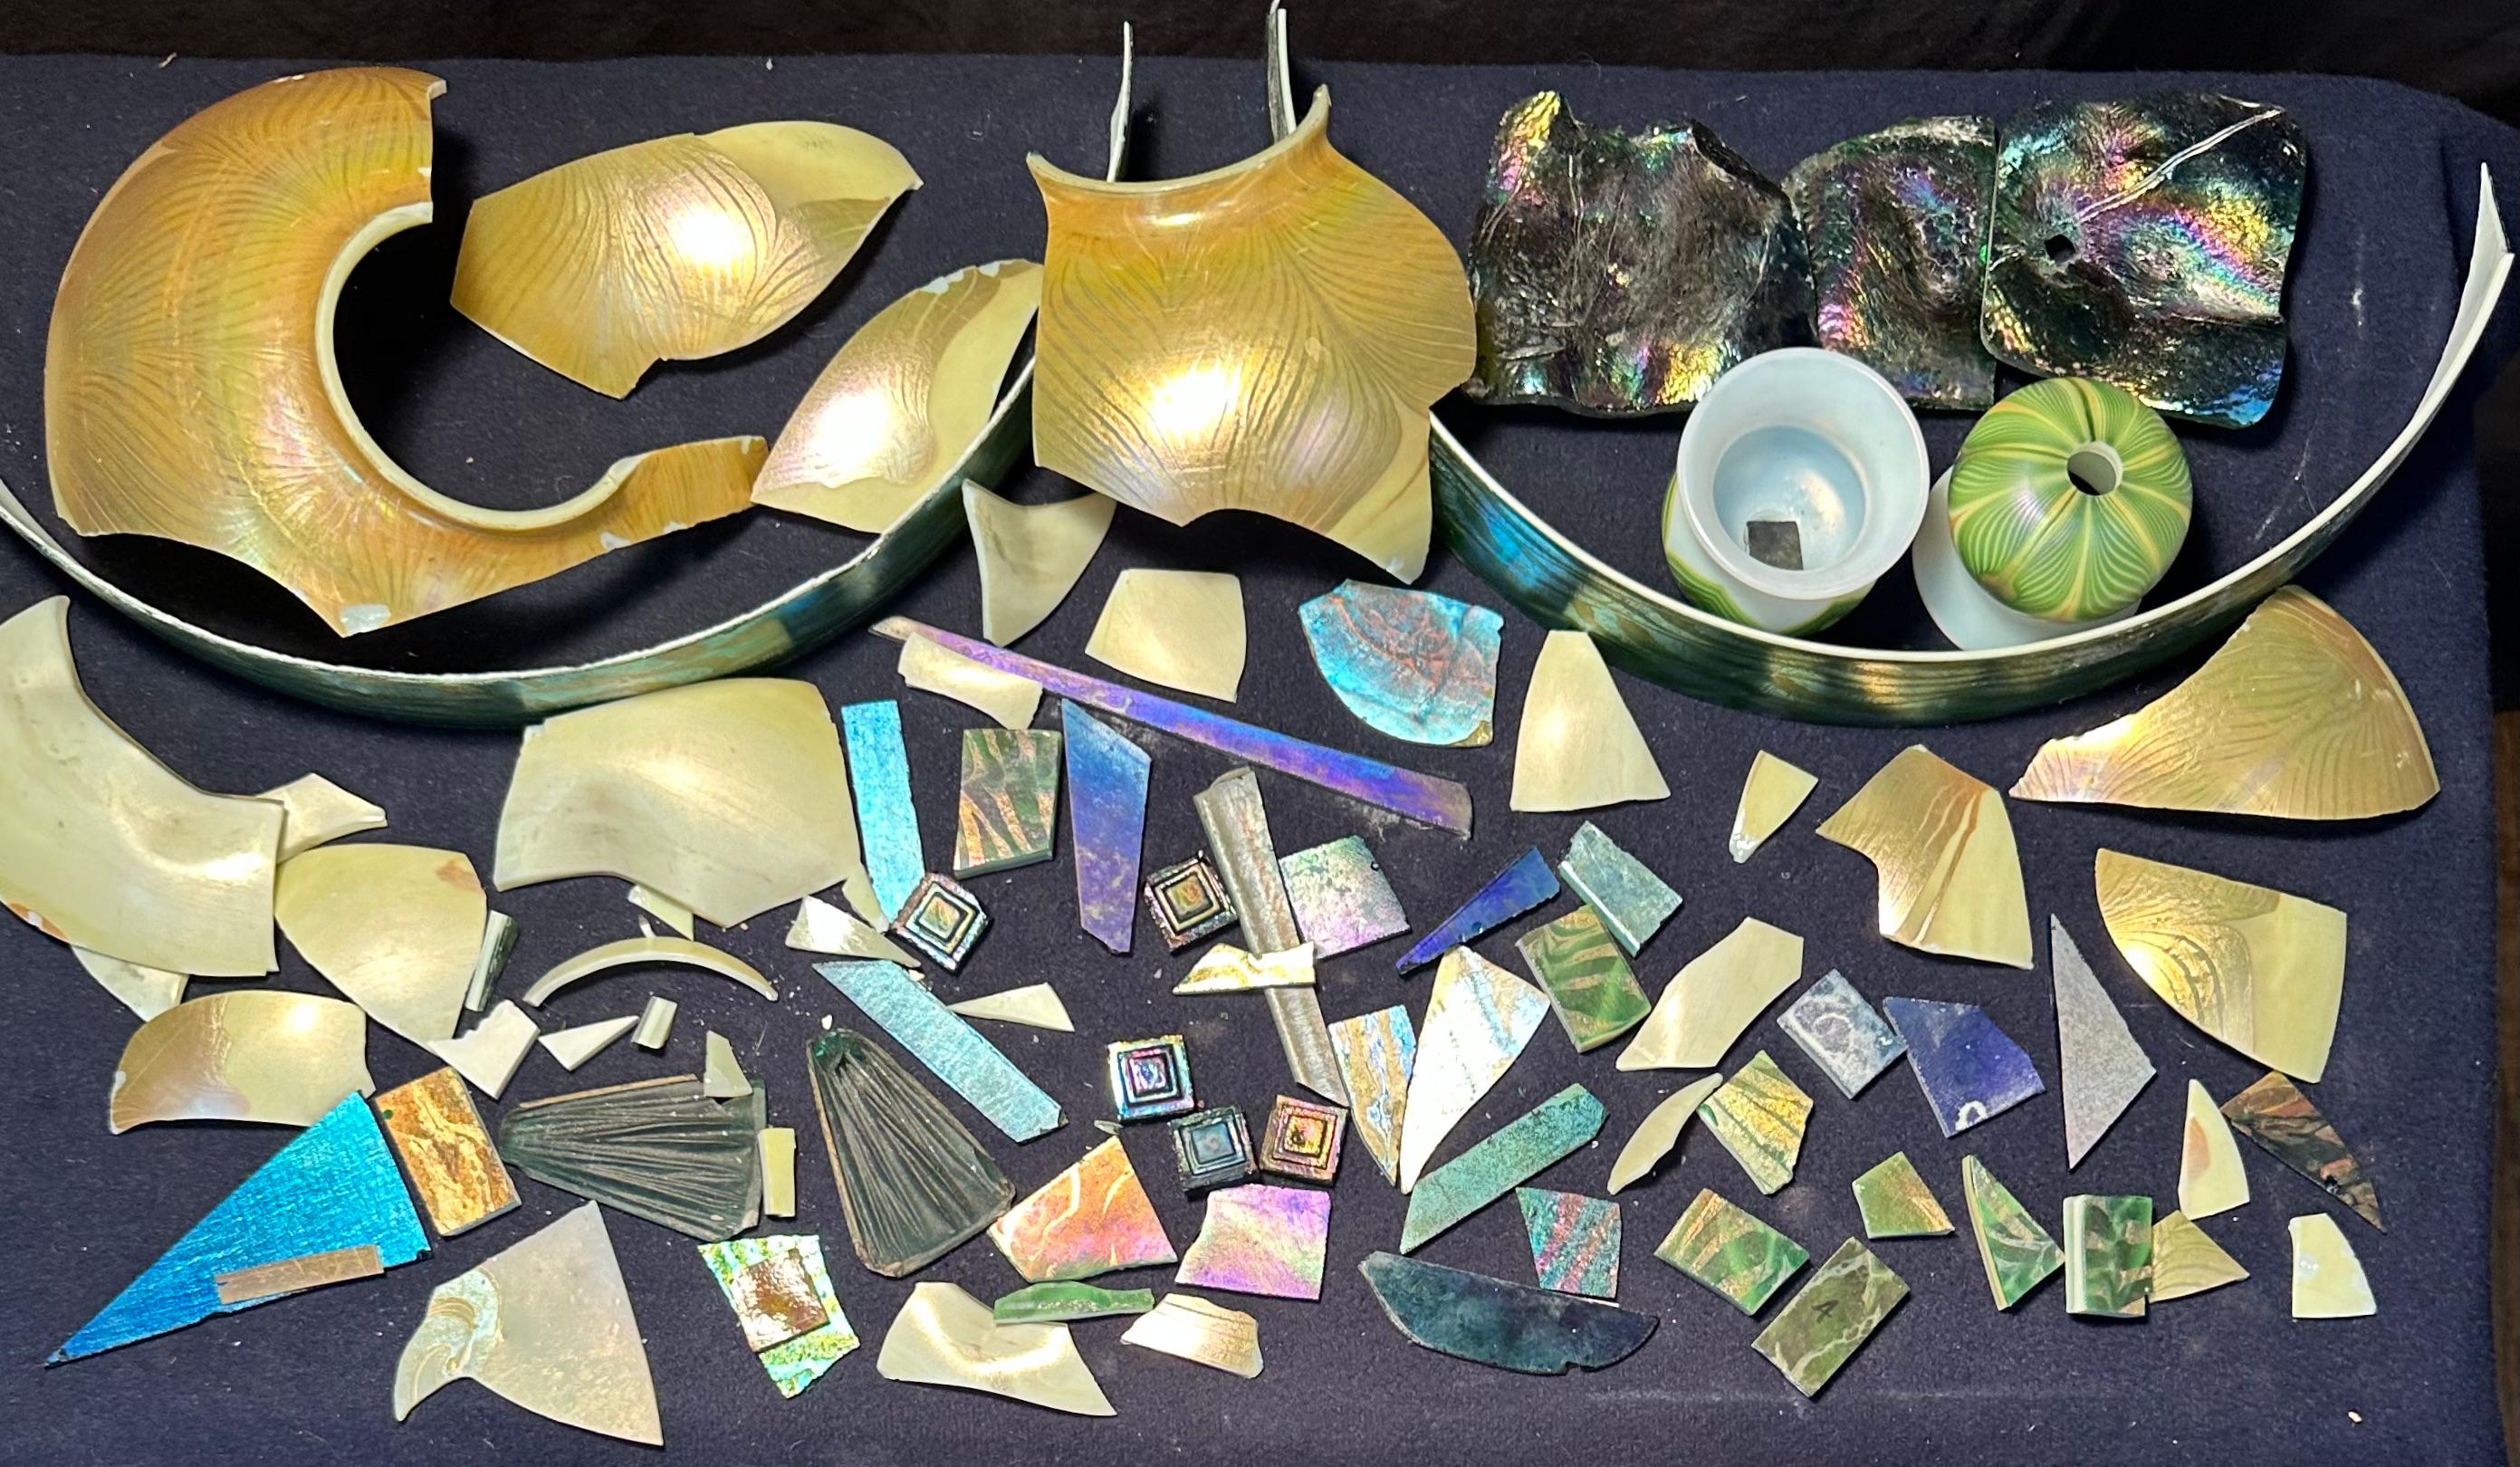 This early 20th century collection of favrile art glass fragments originated at the Tiffany Studios, New York. It consists of numerous pieces of favrile art glass fragments in various shapes, sizes & colors. This assortment of favrile glass can be